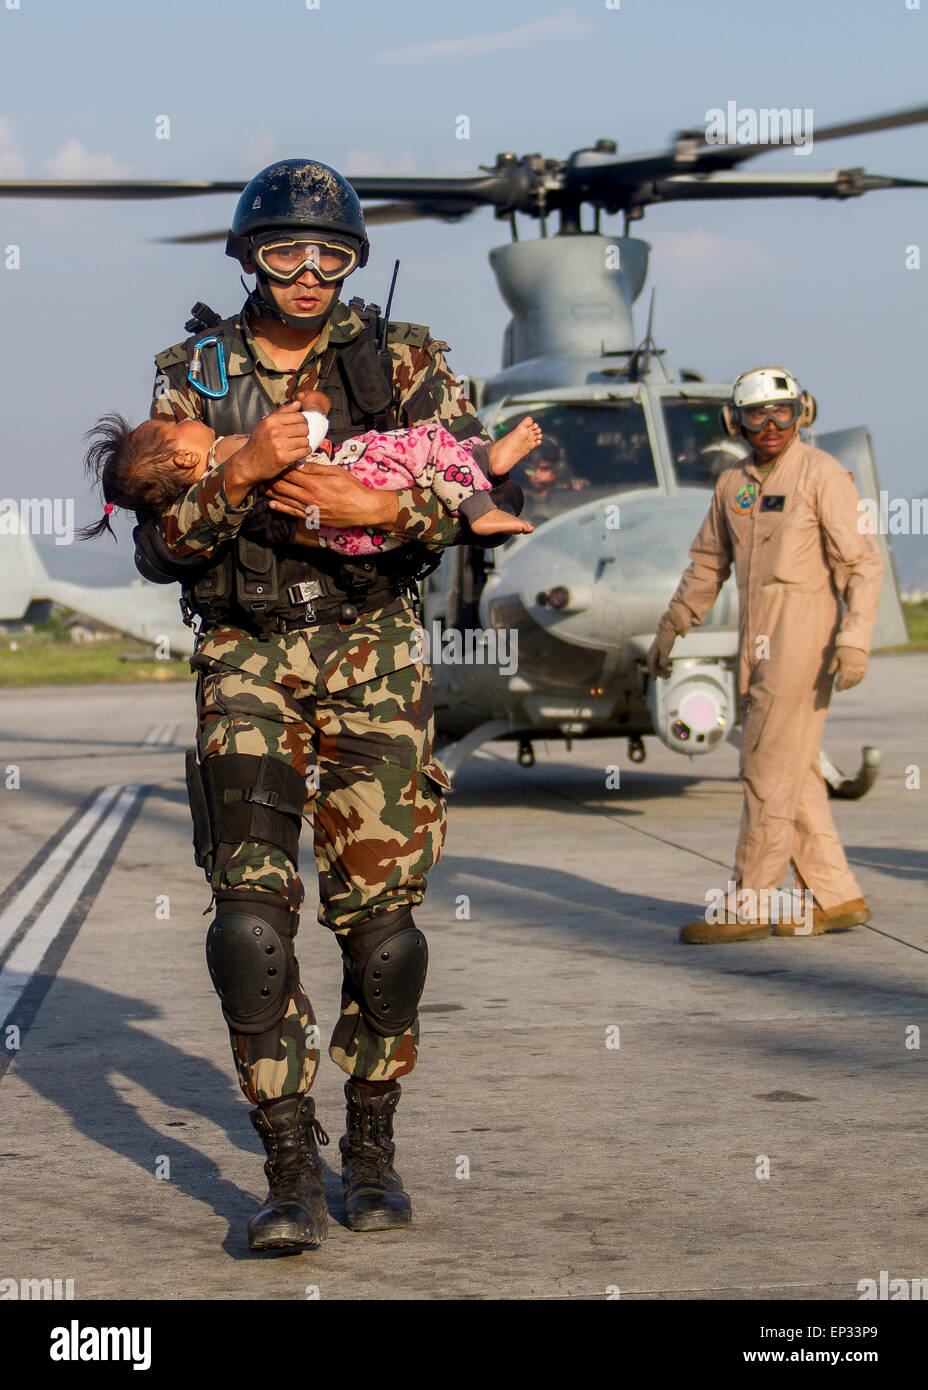 Kathmandu, Nepal. 13th May, 2015. A Nepalese soldier carries a young earthquake victim from a U.S Marine Corps helicopter to a medical triage area setup at Tribhuvan International Airport May 12, 2015 in Kathmandu, Nepal. A 7.3 magnitude aftershock earthquake struck the kingdom following the 7.8 magnitude earthquake on April 25th. Stock Photo